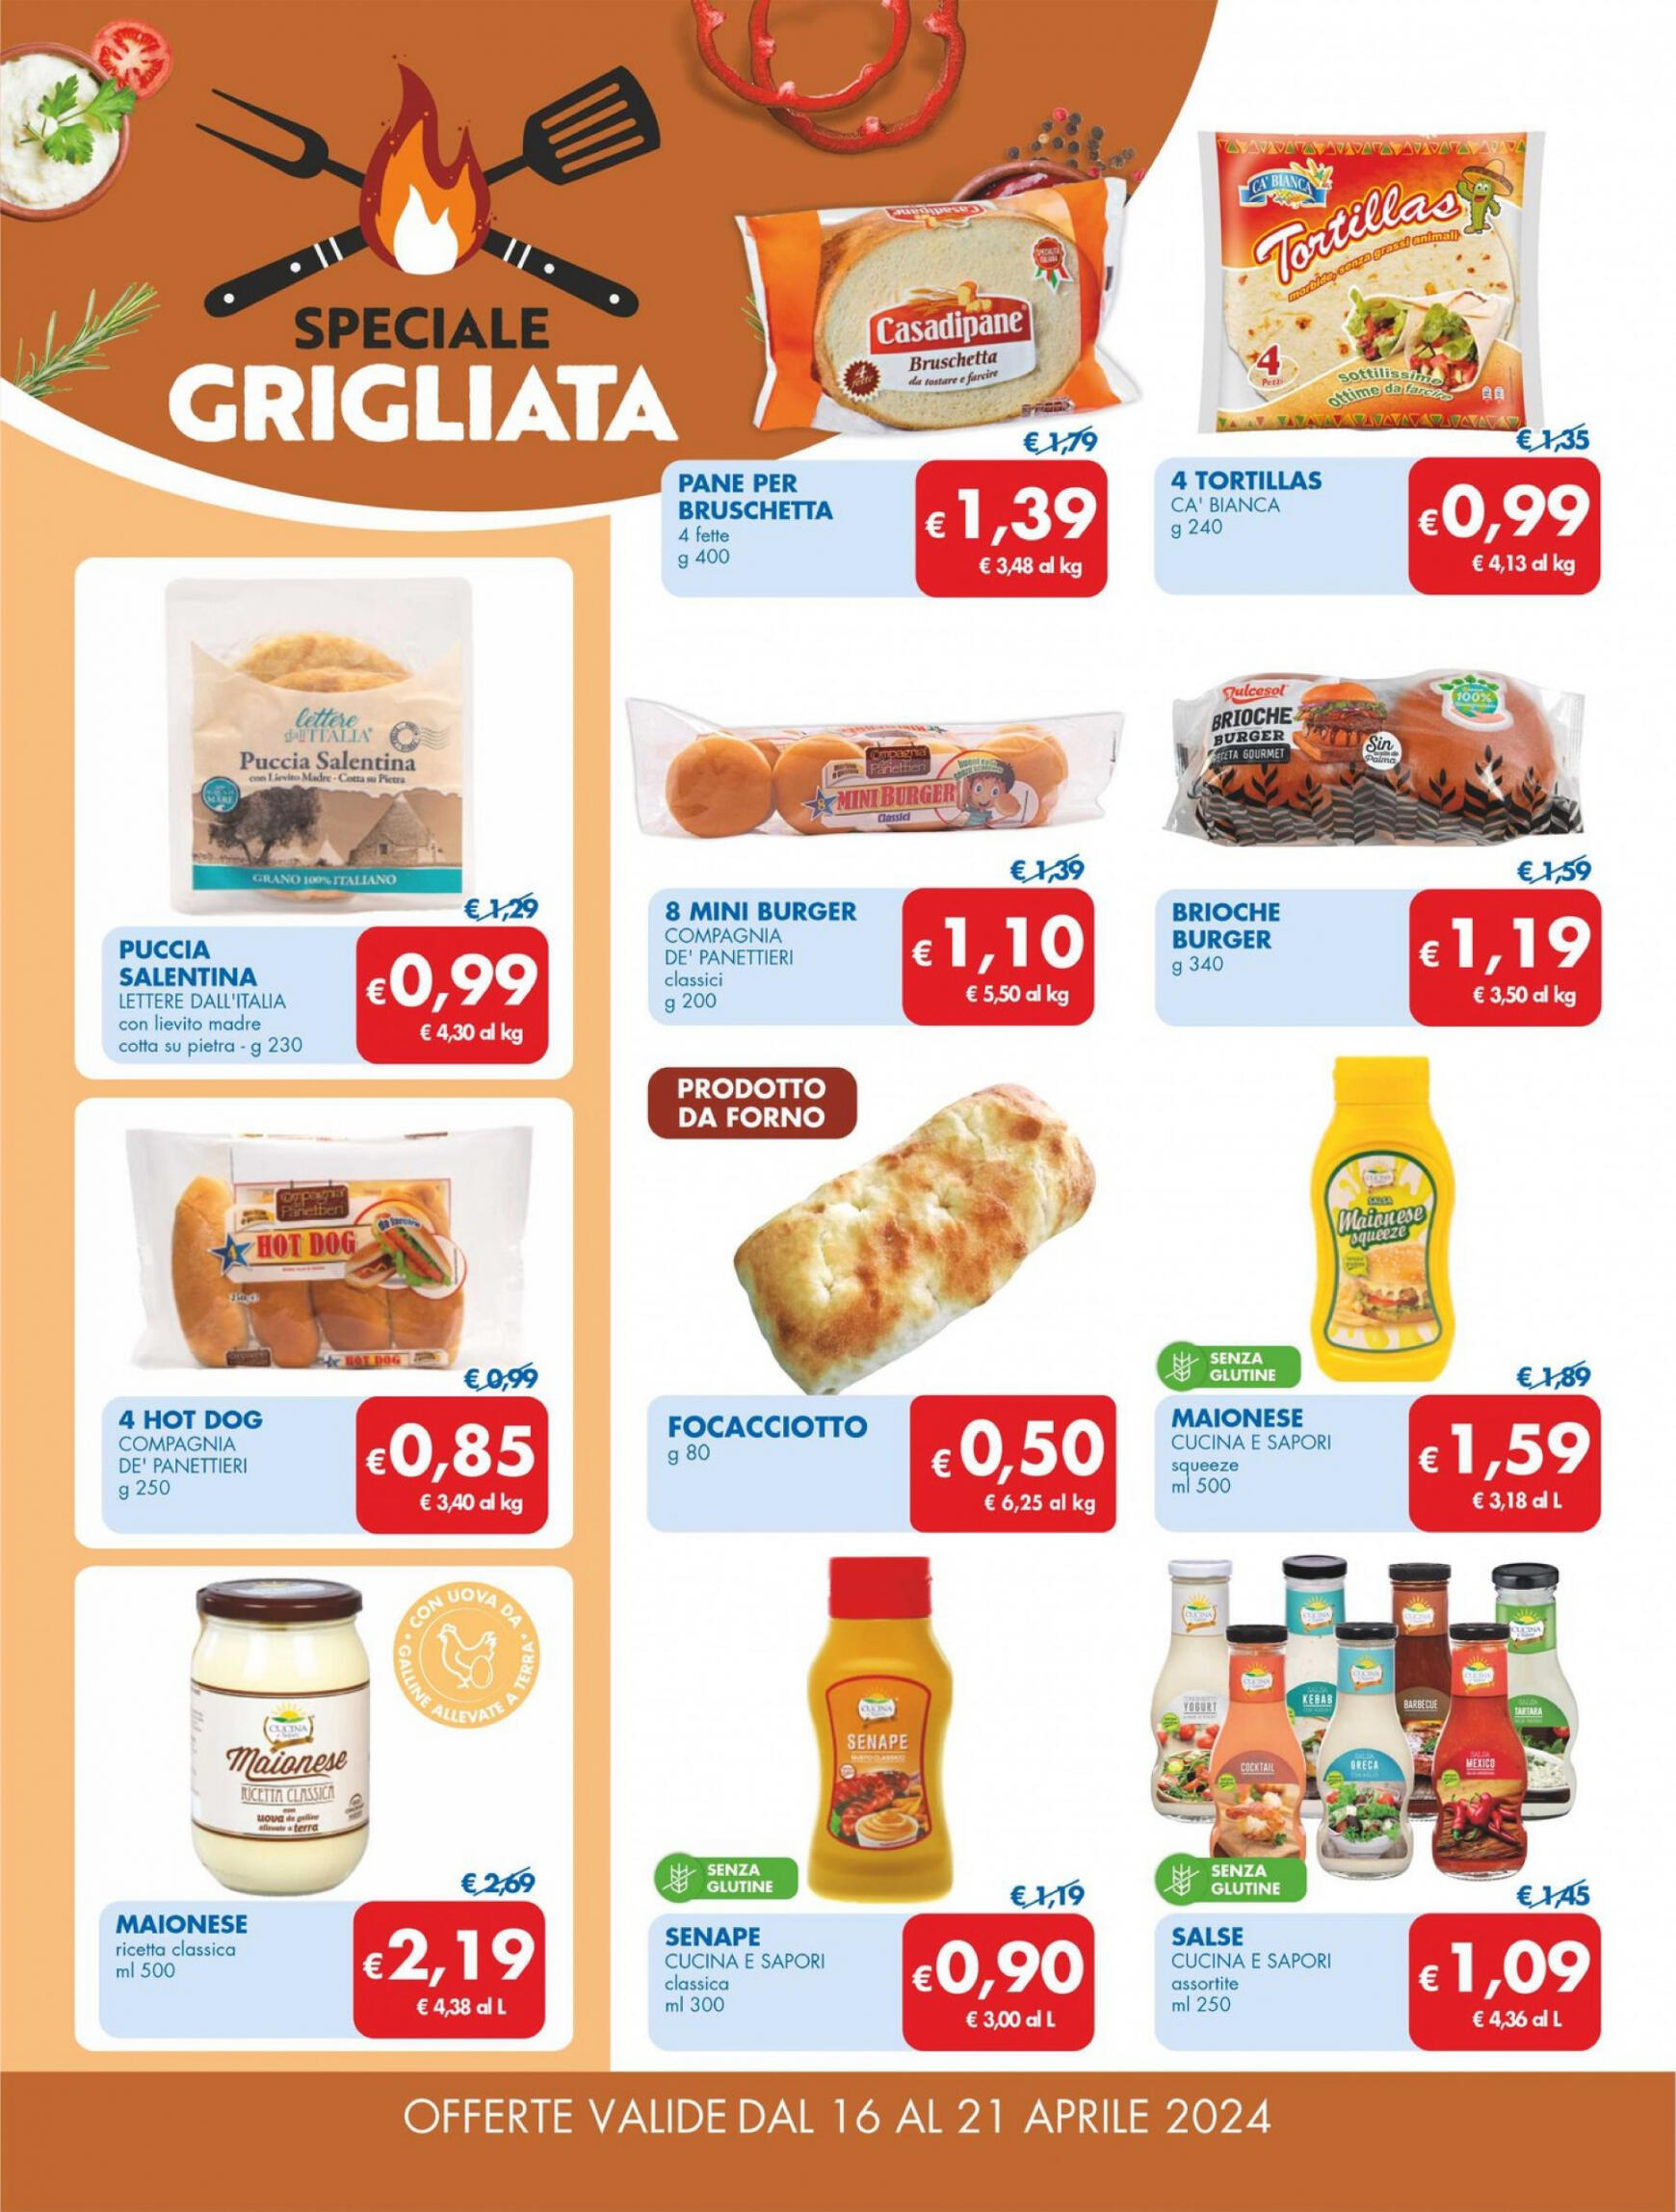 md-discount - Nuovo volantino MD 16.04. - 21.04. - page: 5